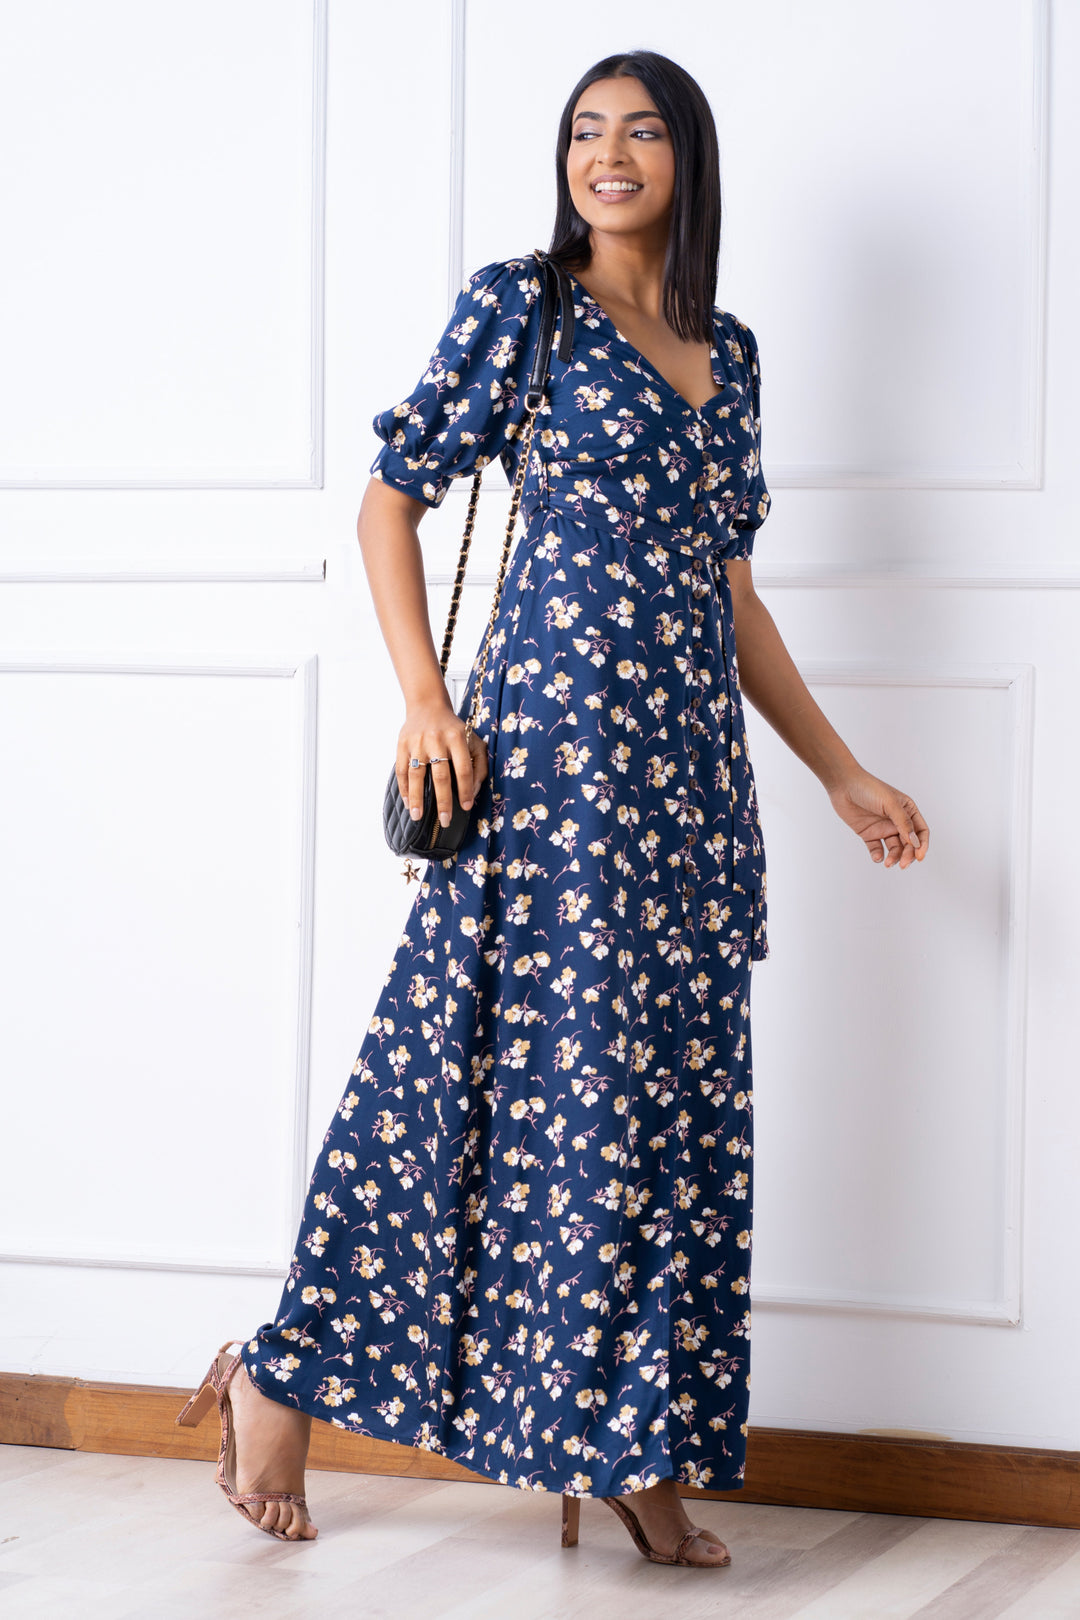 Front Button Puff Sleeve Maxi Dress - Slim Fit, Dress, Everyday Dresses, Holiday Dresses, Maxi Dress, Maxi Dresses, New Arrivals, Short Sleeves, Slim Fit, Smart Casual Dress, V Neck - MONDY, 